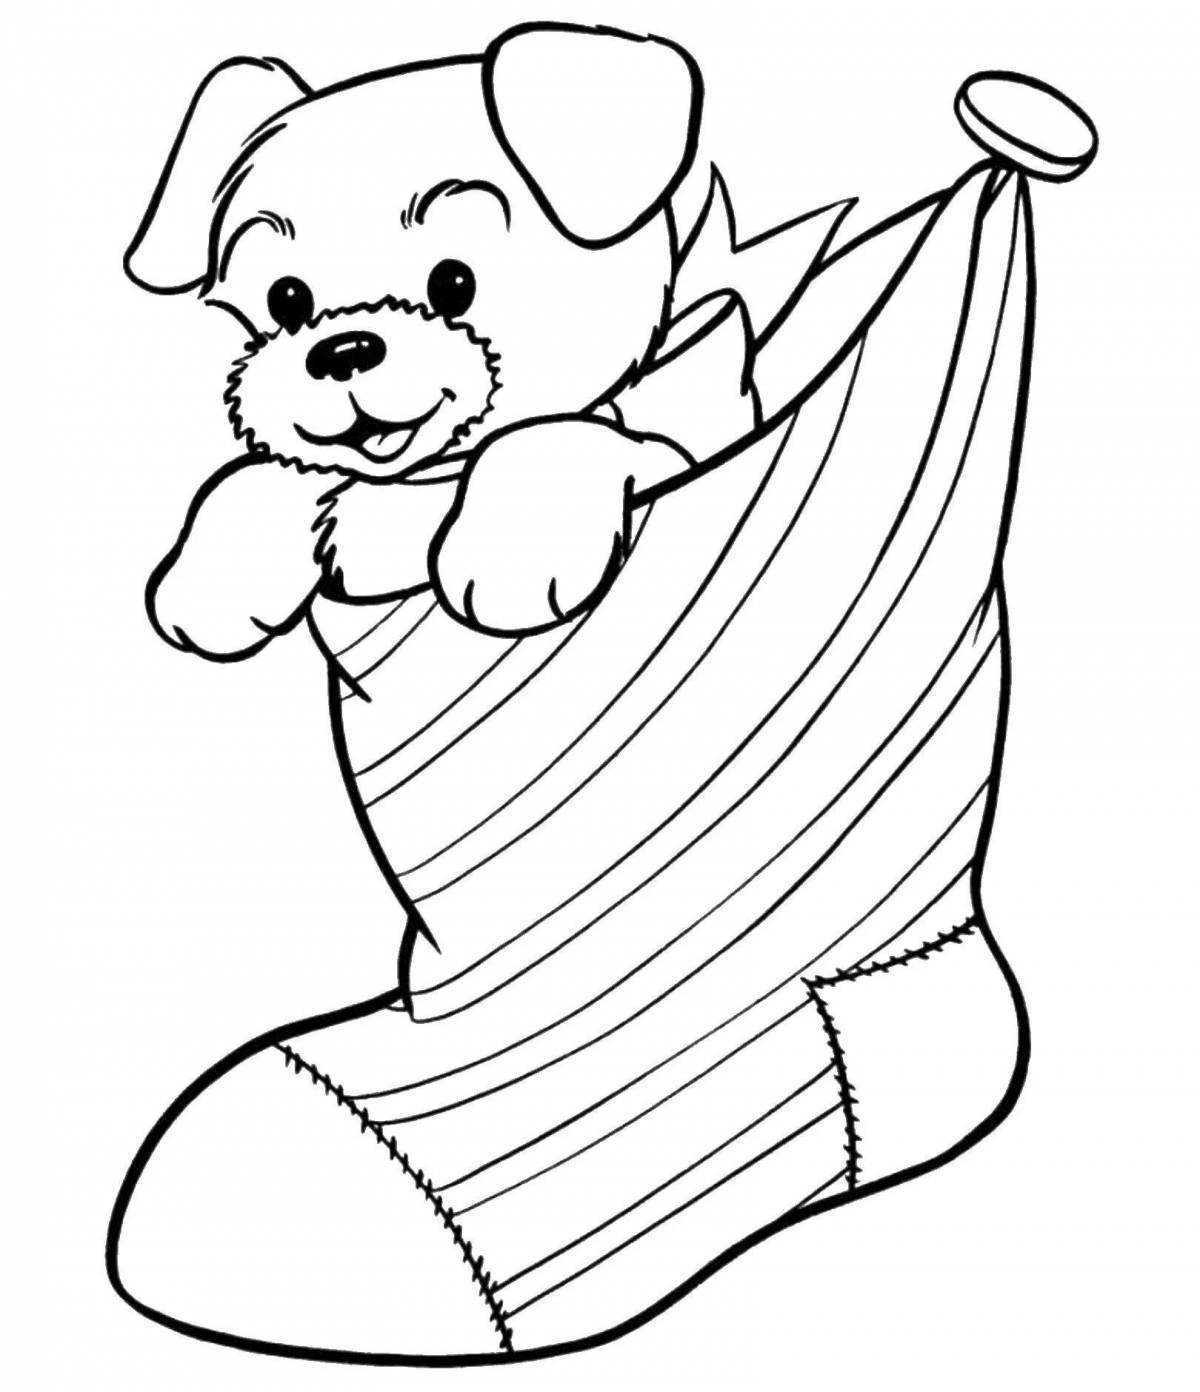 Glamourous Christmas dog coloring page